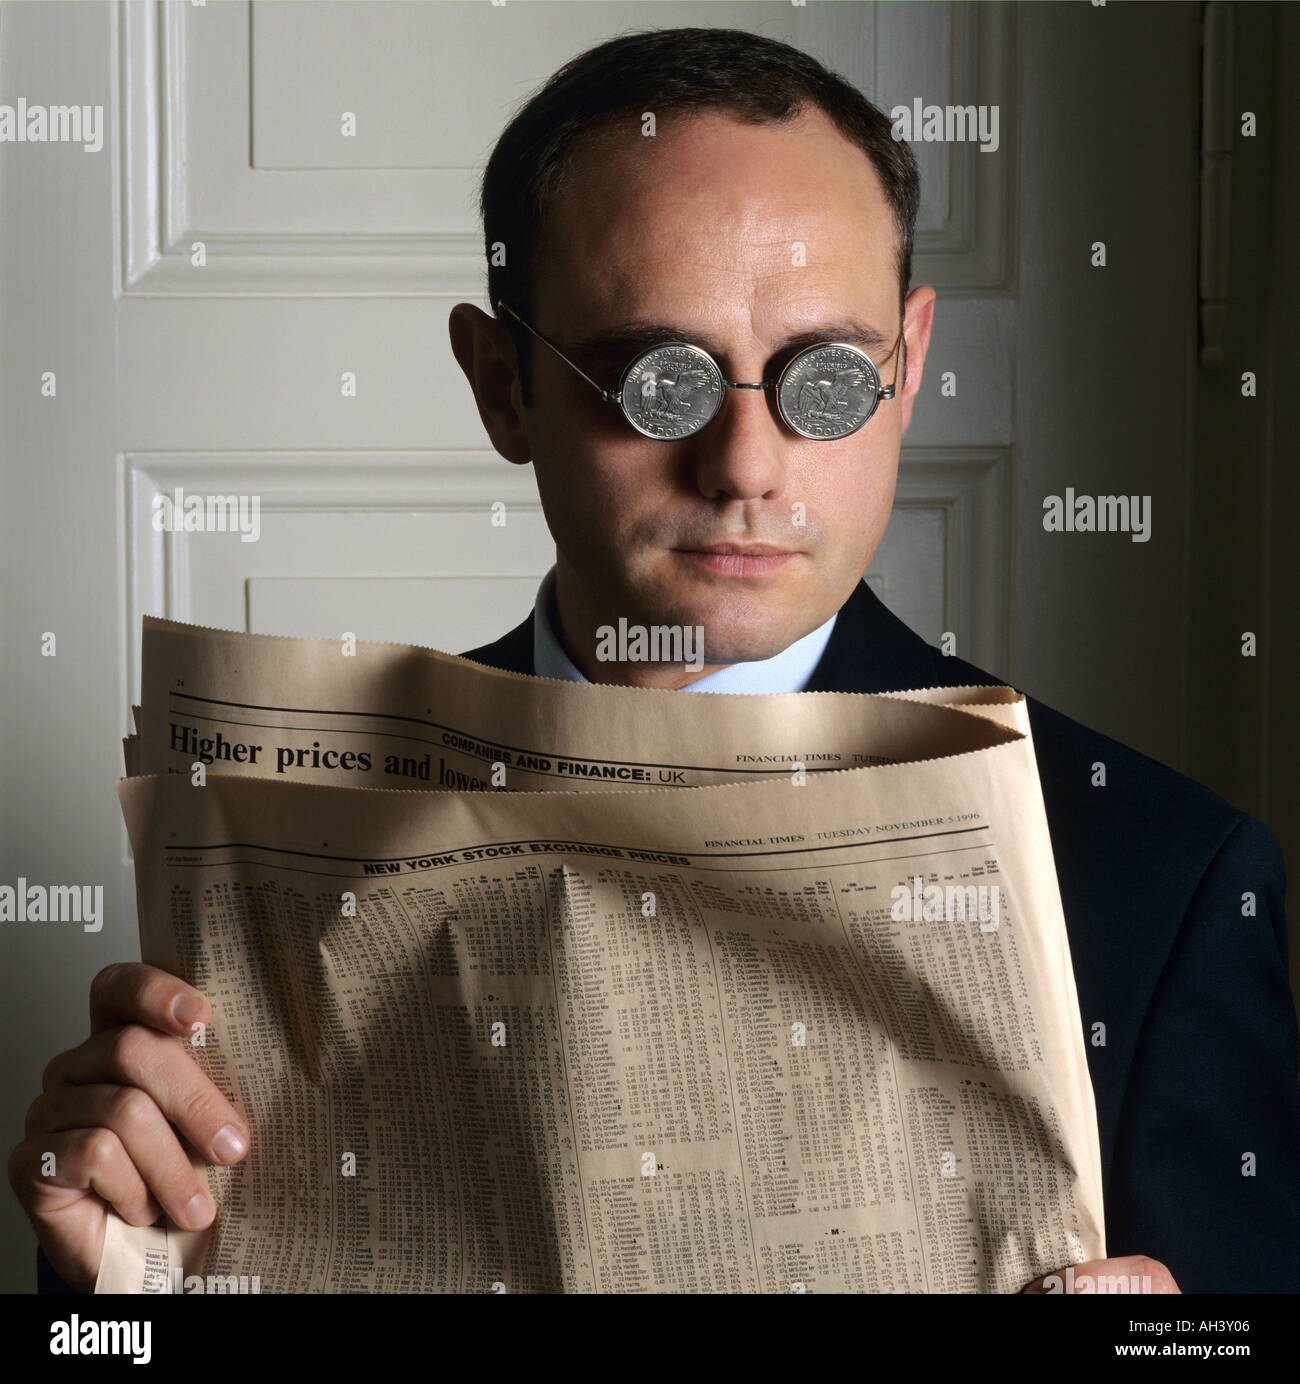 PORTRAIT OF A MAN WITH US DOLLAR COIN GLASSES AND FINANCIAL NEWSPAPER Stock Photo